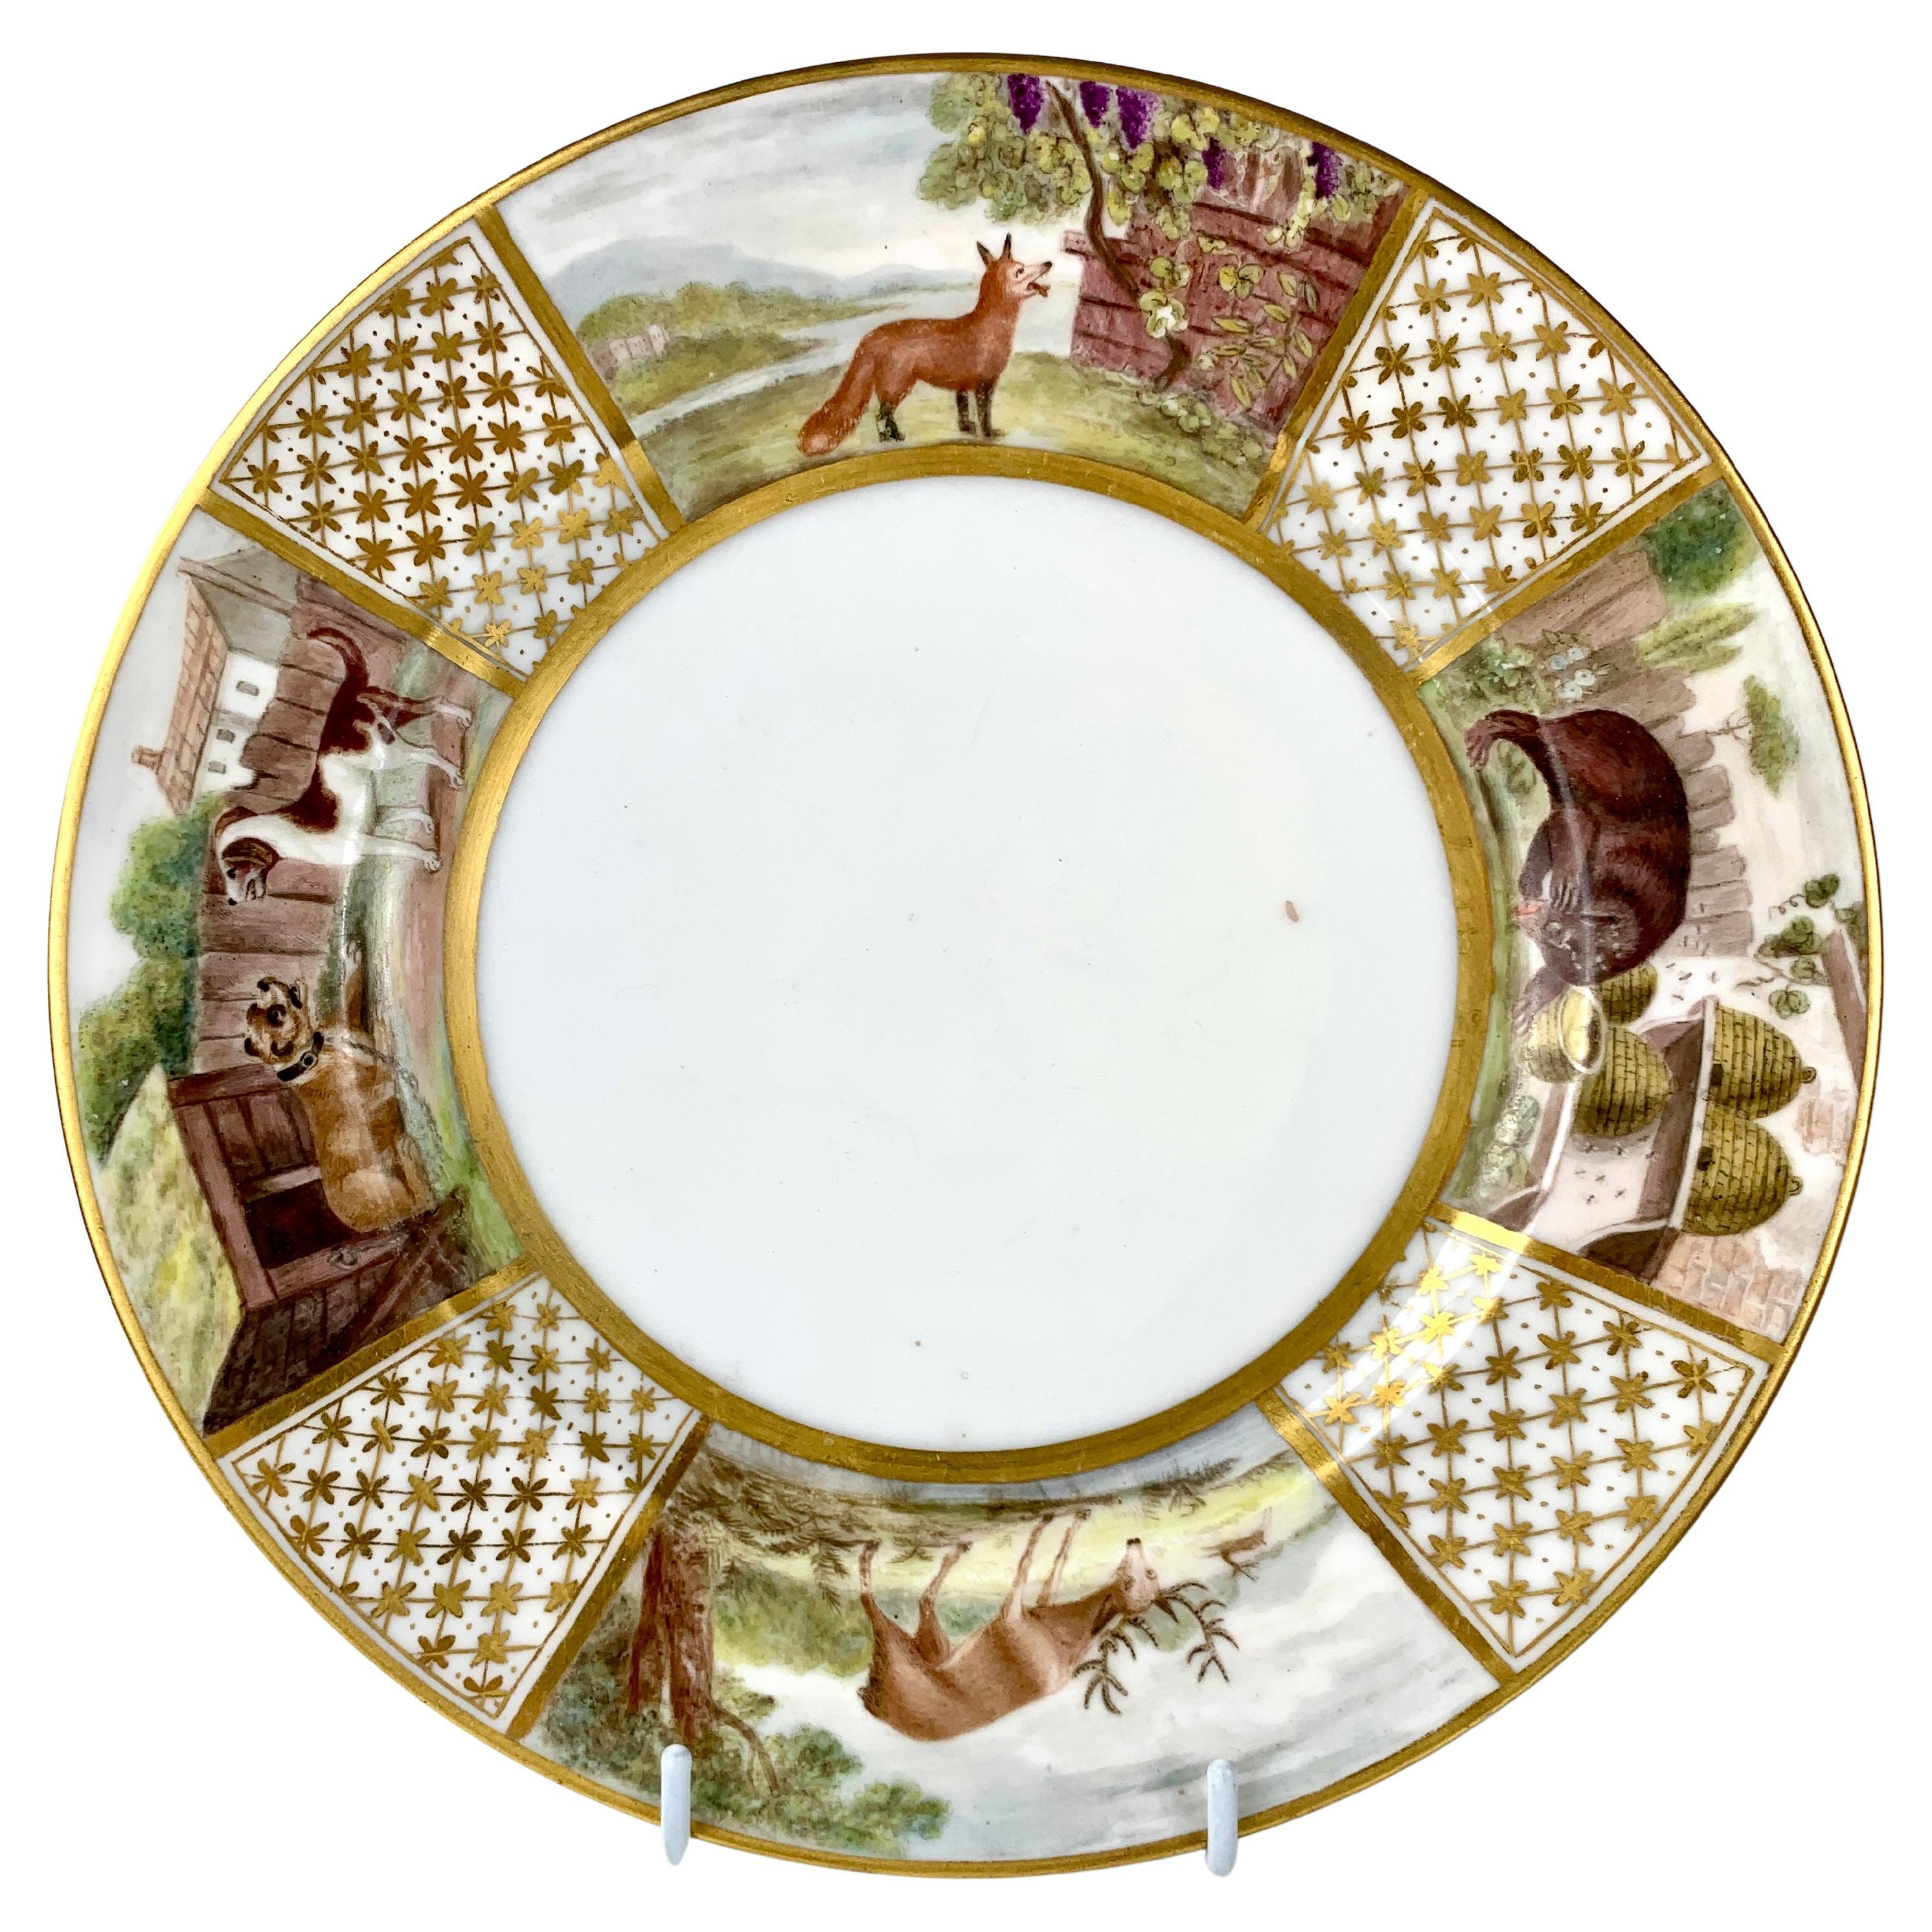 Aesop's Fables Animals on Antique French Porcelain Plate Hand Painted circa 1825 For Sale